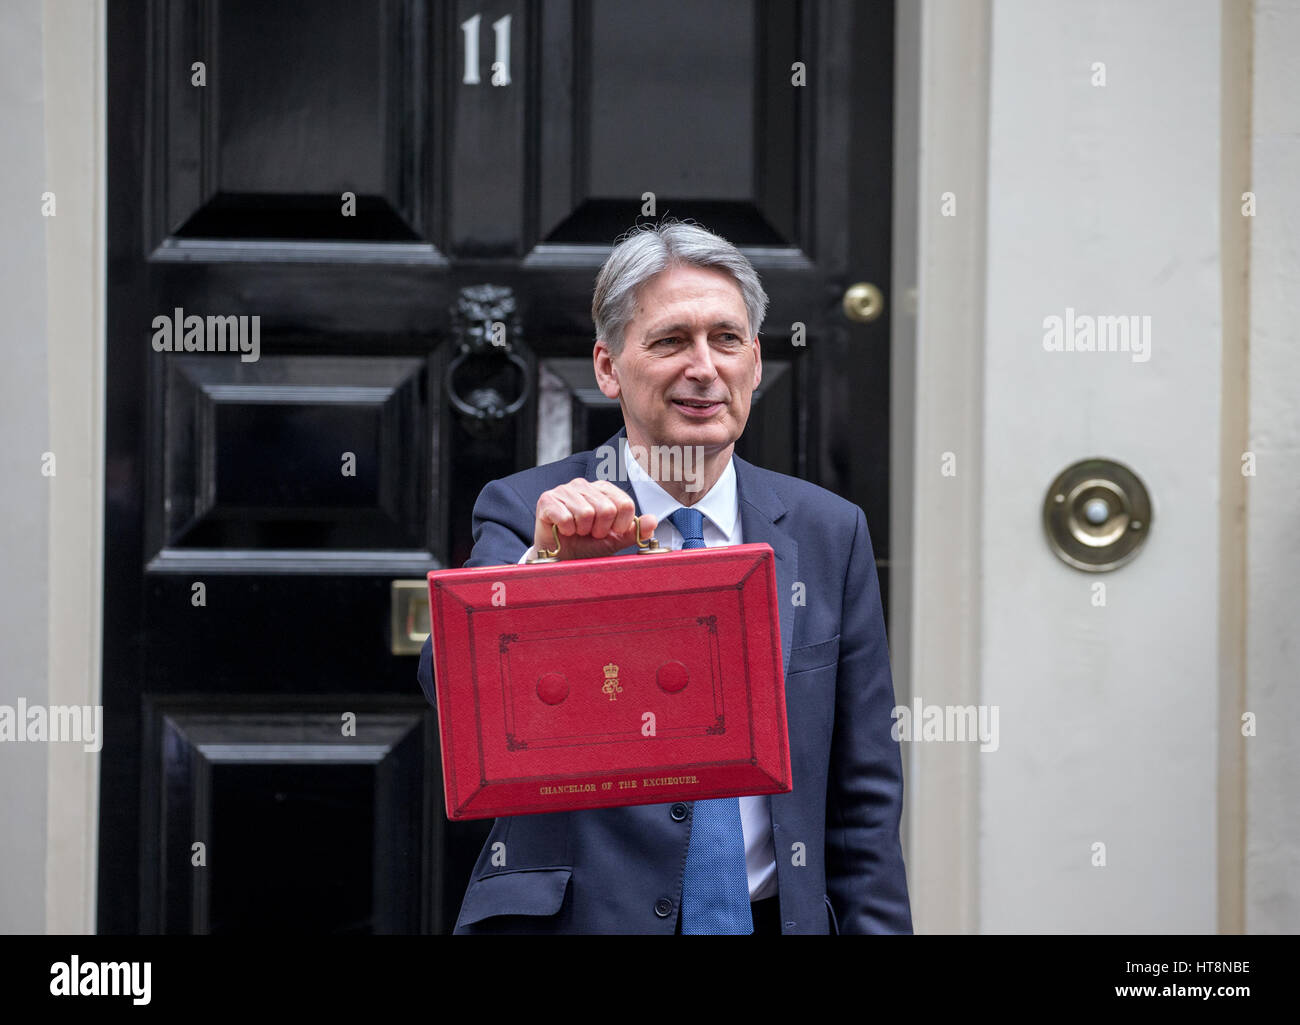 Chancellor of the Exchequer, Philip Hammond, shows his red despatch box on the steps of number 11 before heading to {Parliament to deliver his budget Stock Photo